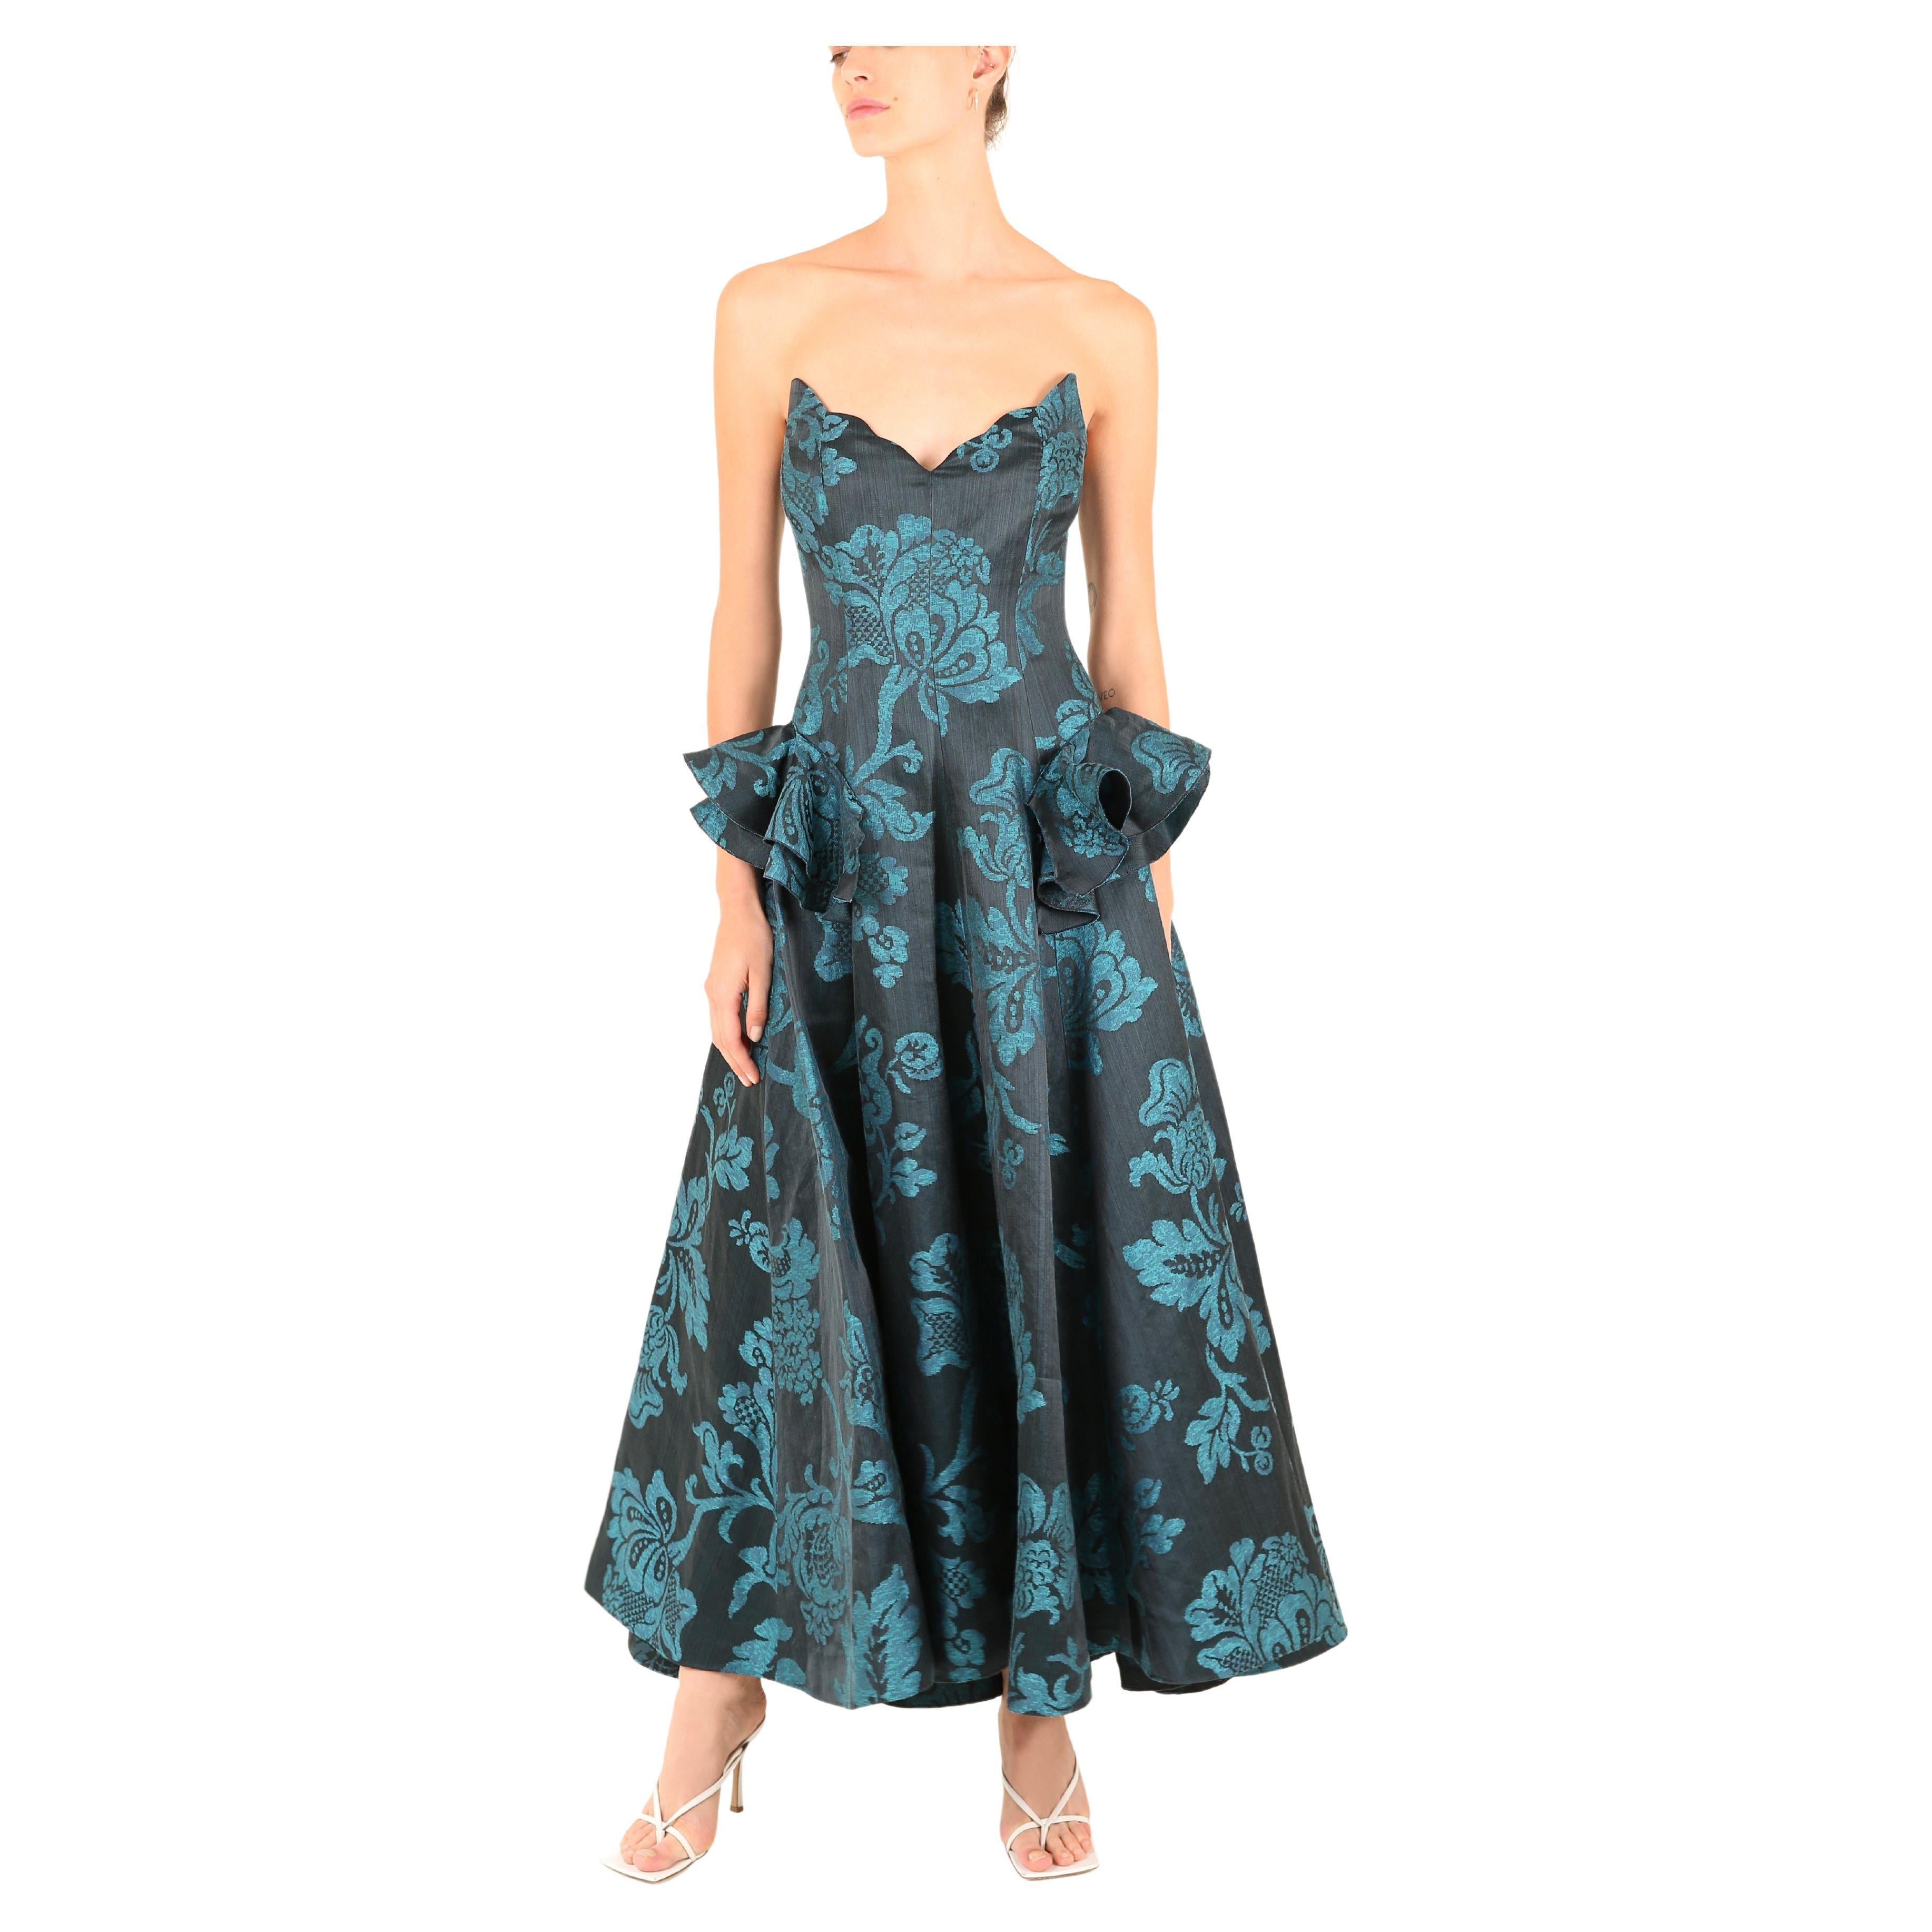 Oscar de la Renta F/W06 strapless floral blue teal fit and flare dress gown XS For Sale